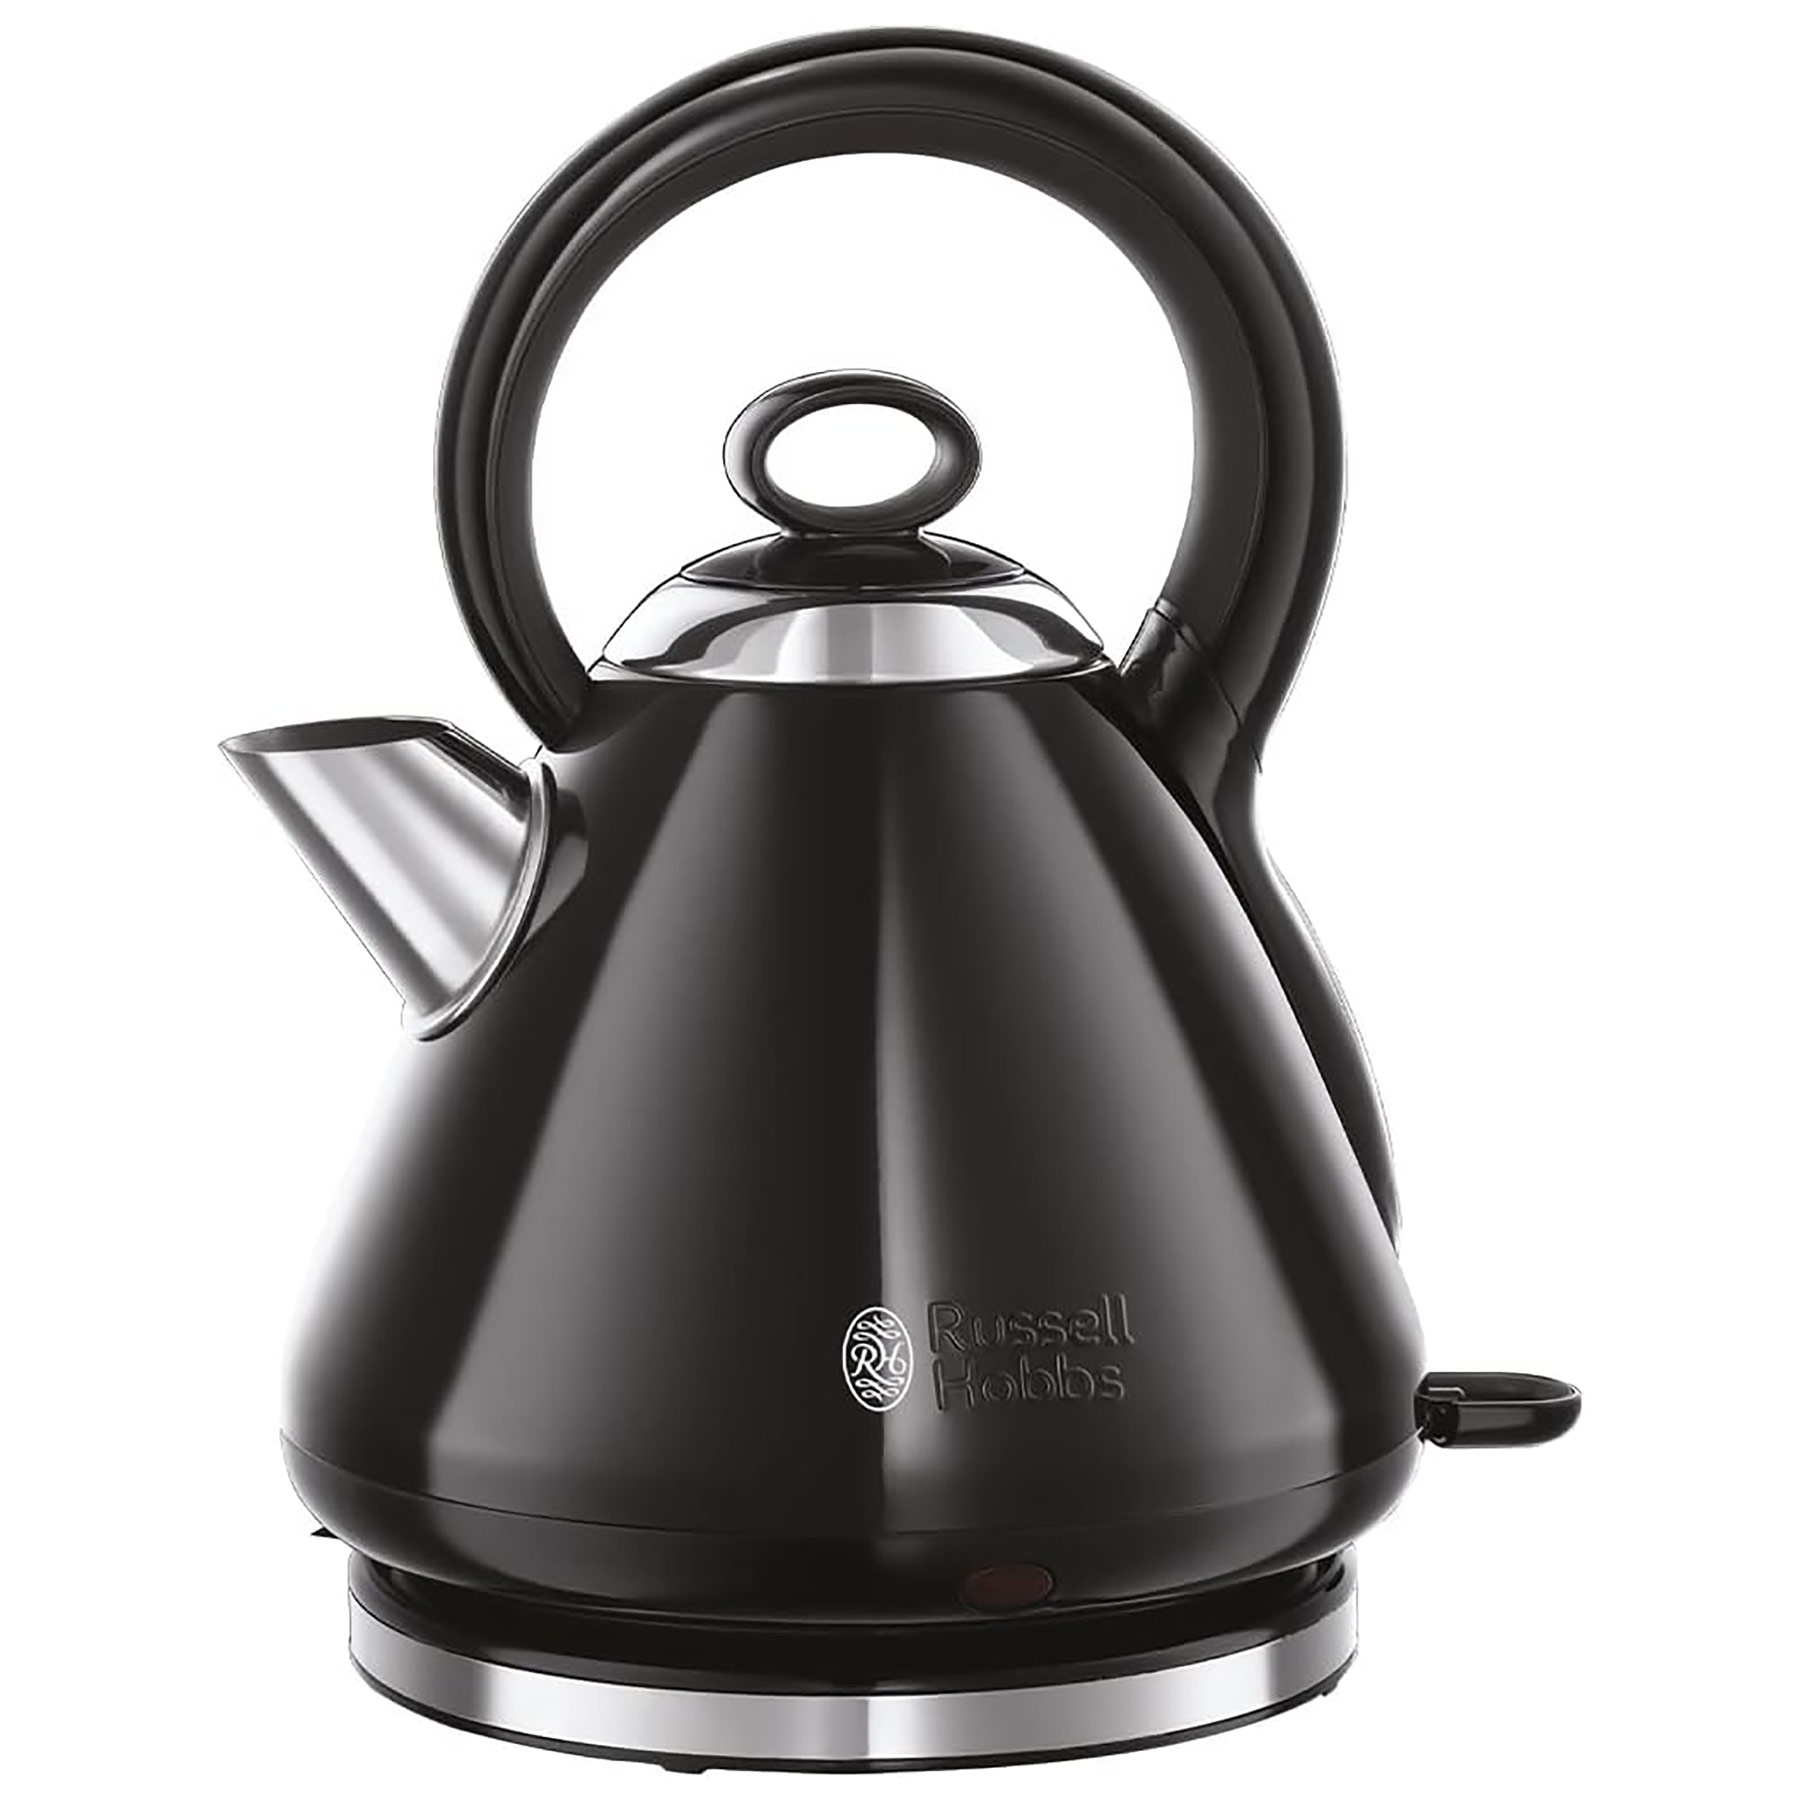 Image of Russell Hobbs 26410 Traditional Cordless Kettle in Black 1 7L 3kW Fast